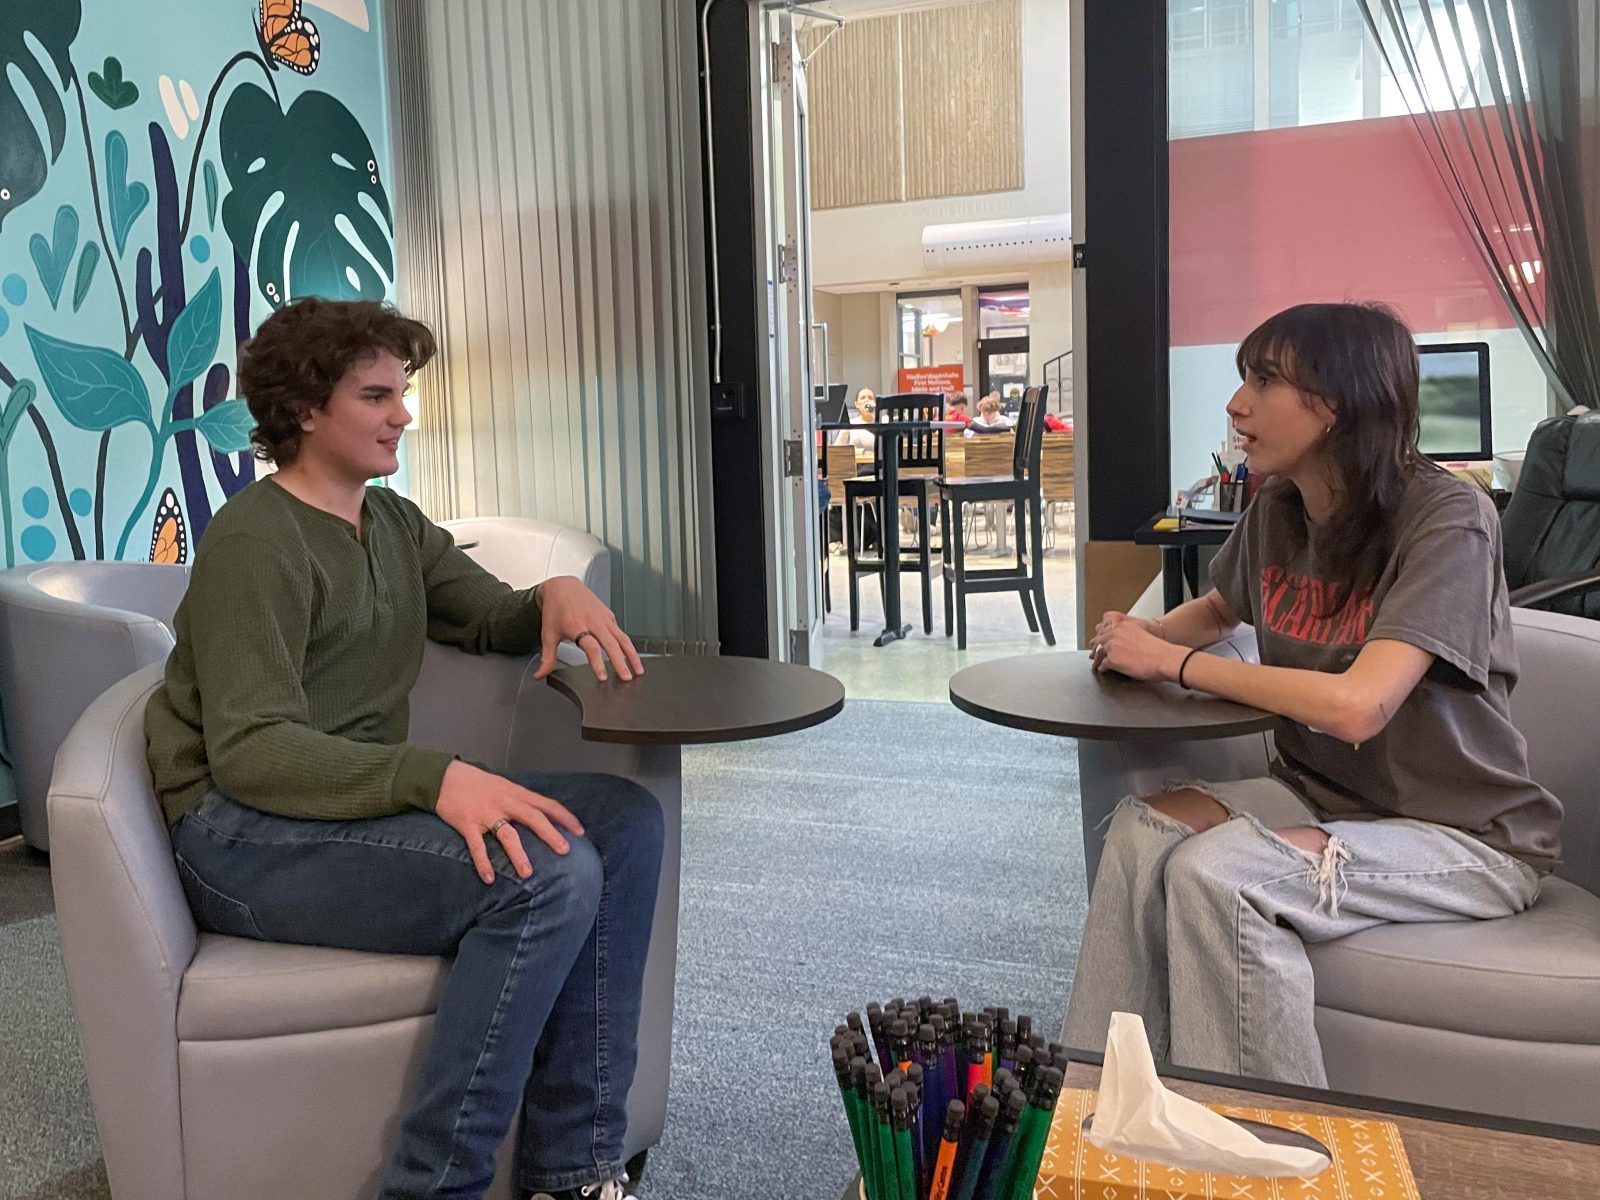 Two university students sit in armchairs having a conversation. A busy cafeteria can be seen through the open door behind them.